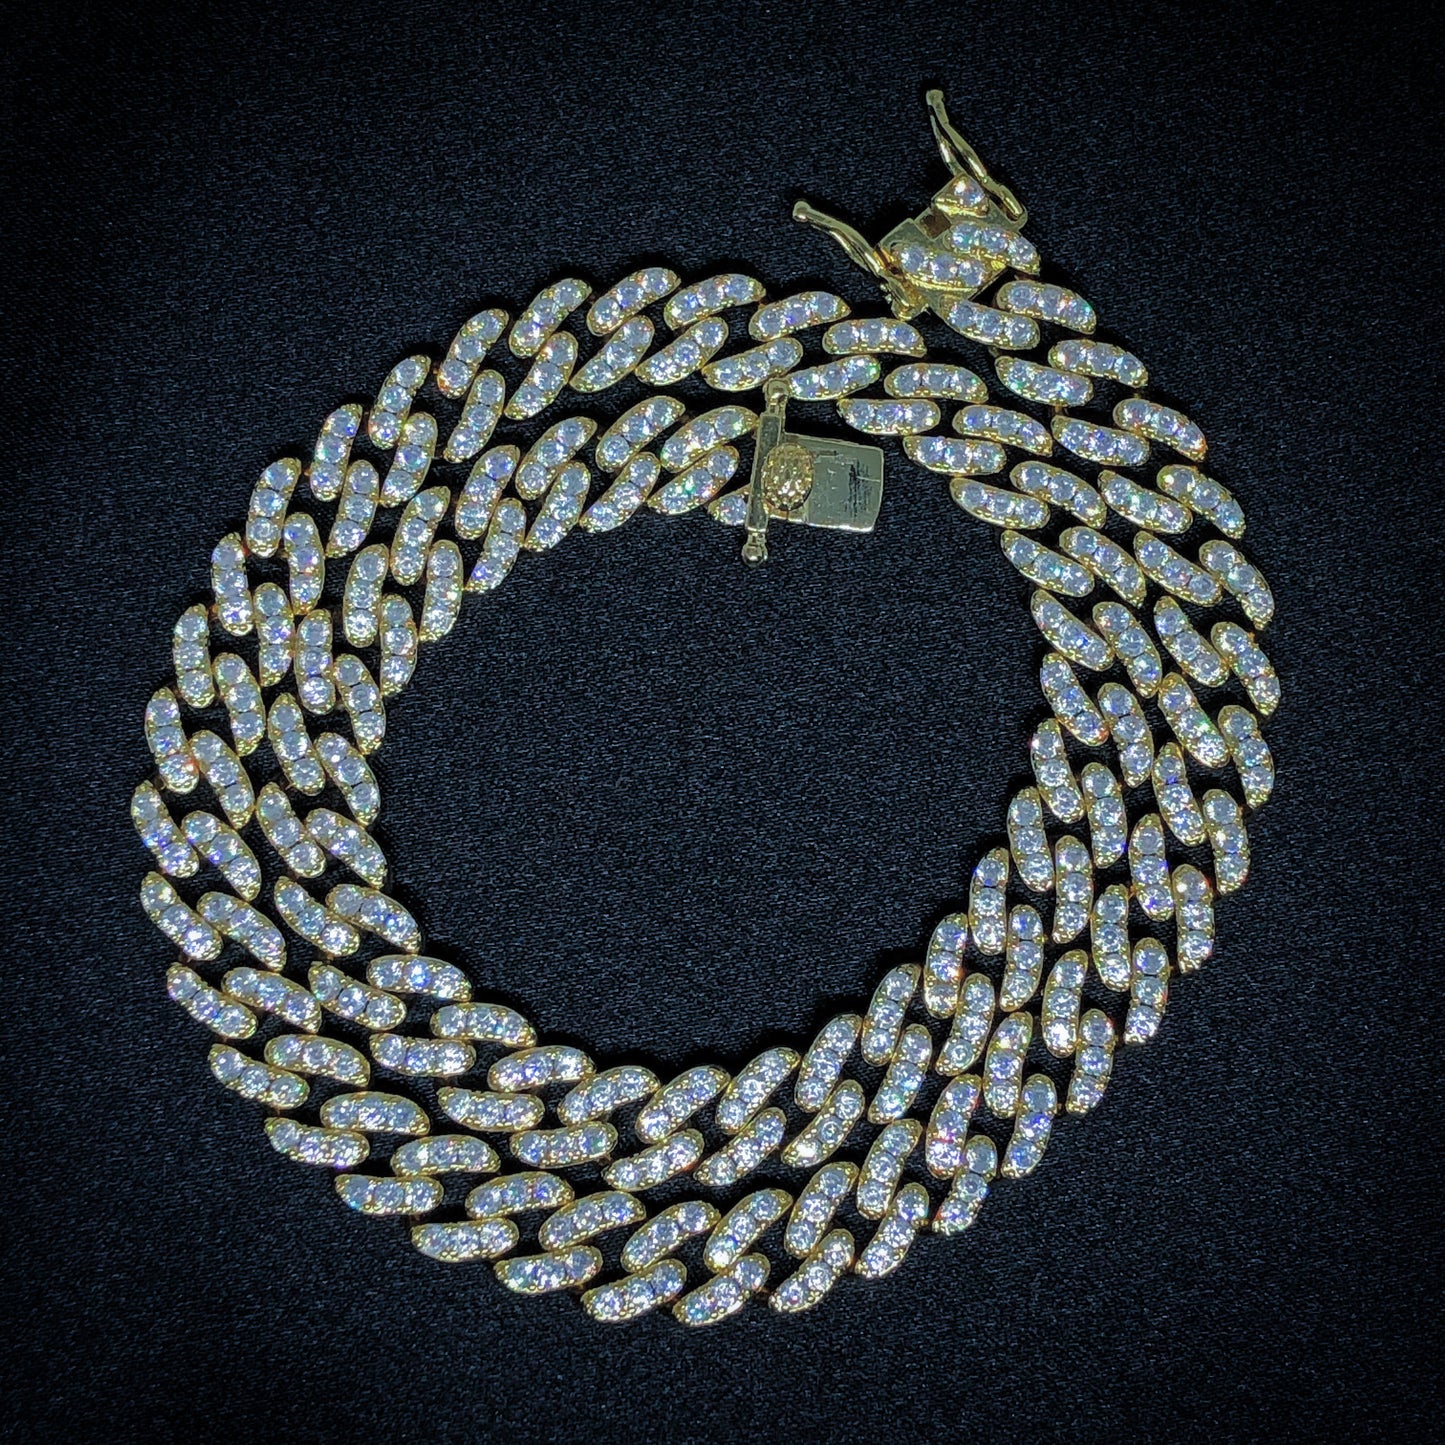 8mm Iced out Cuban Necklace - Gold